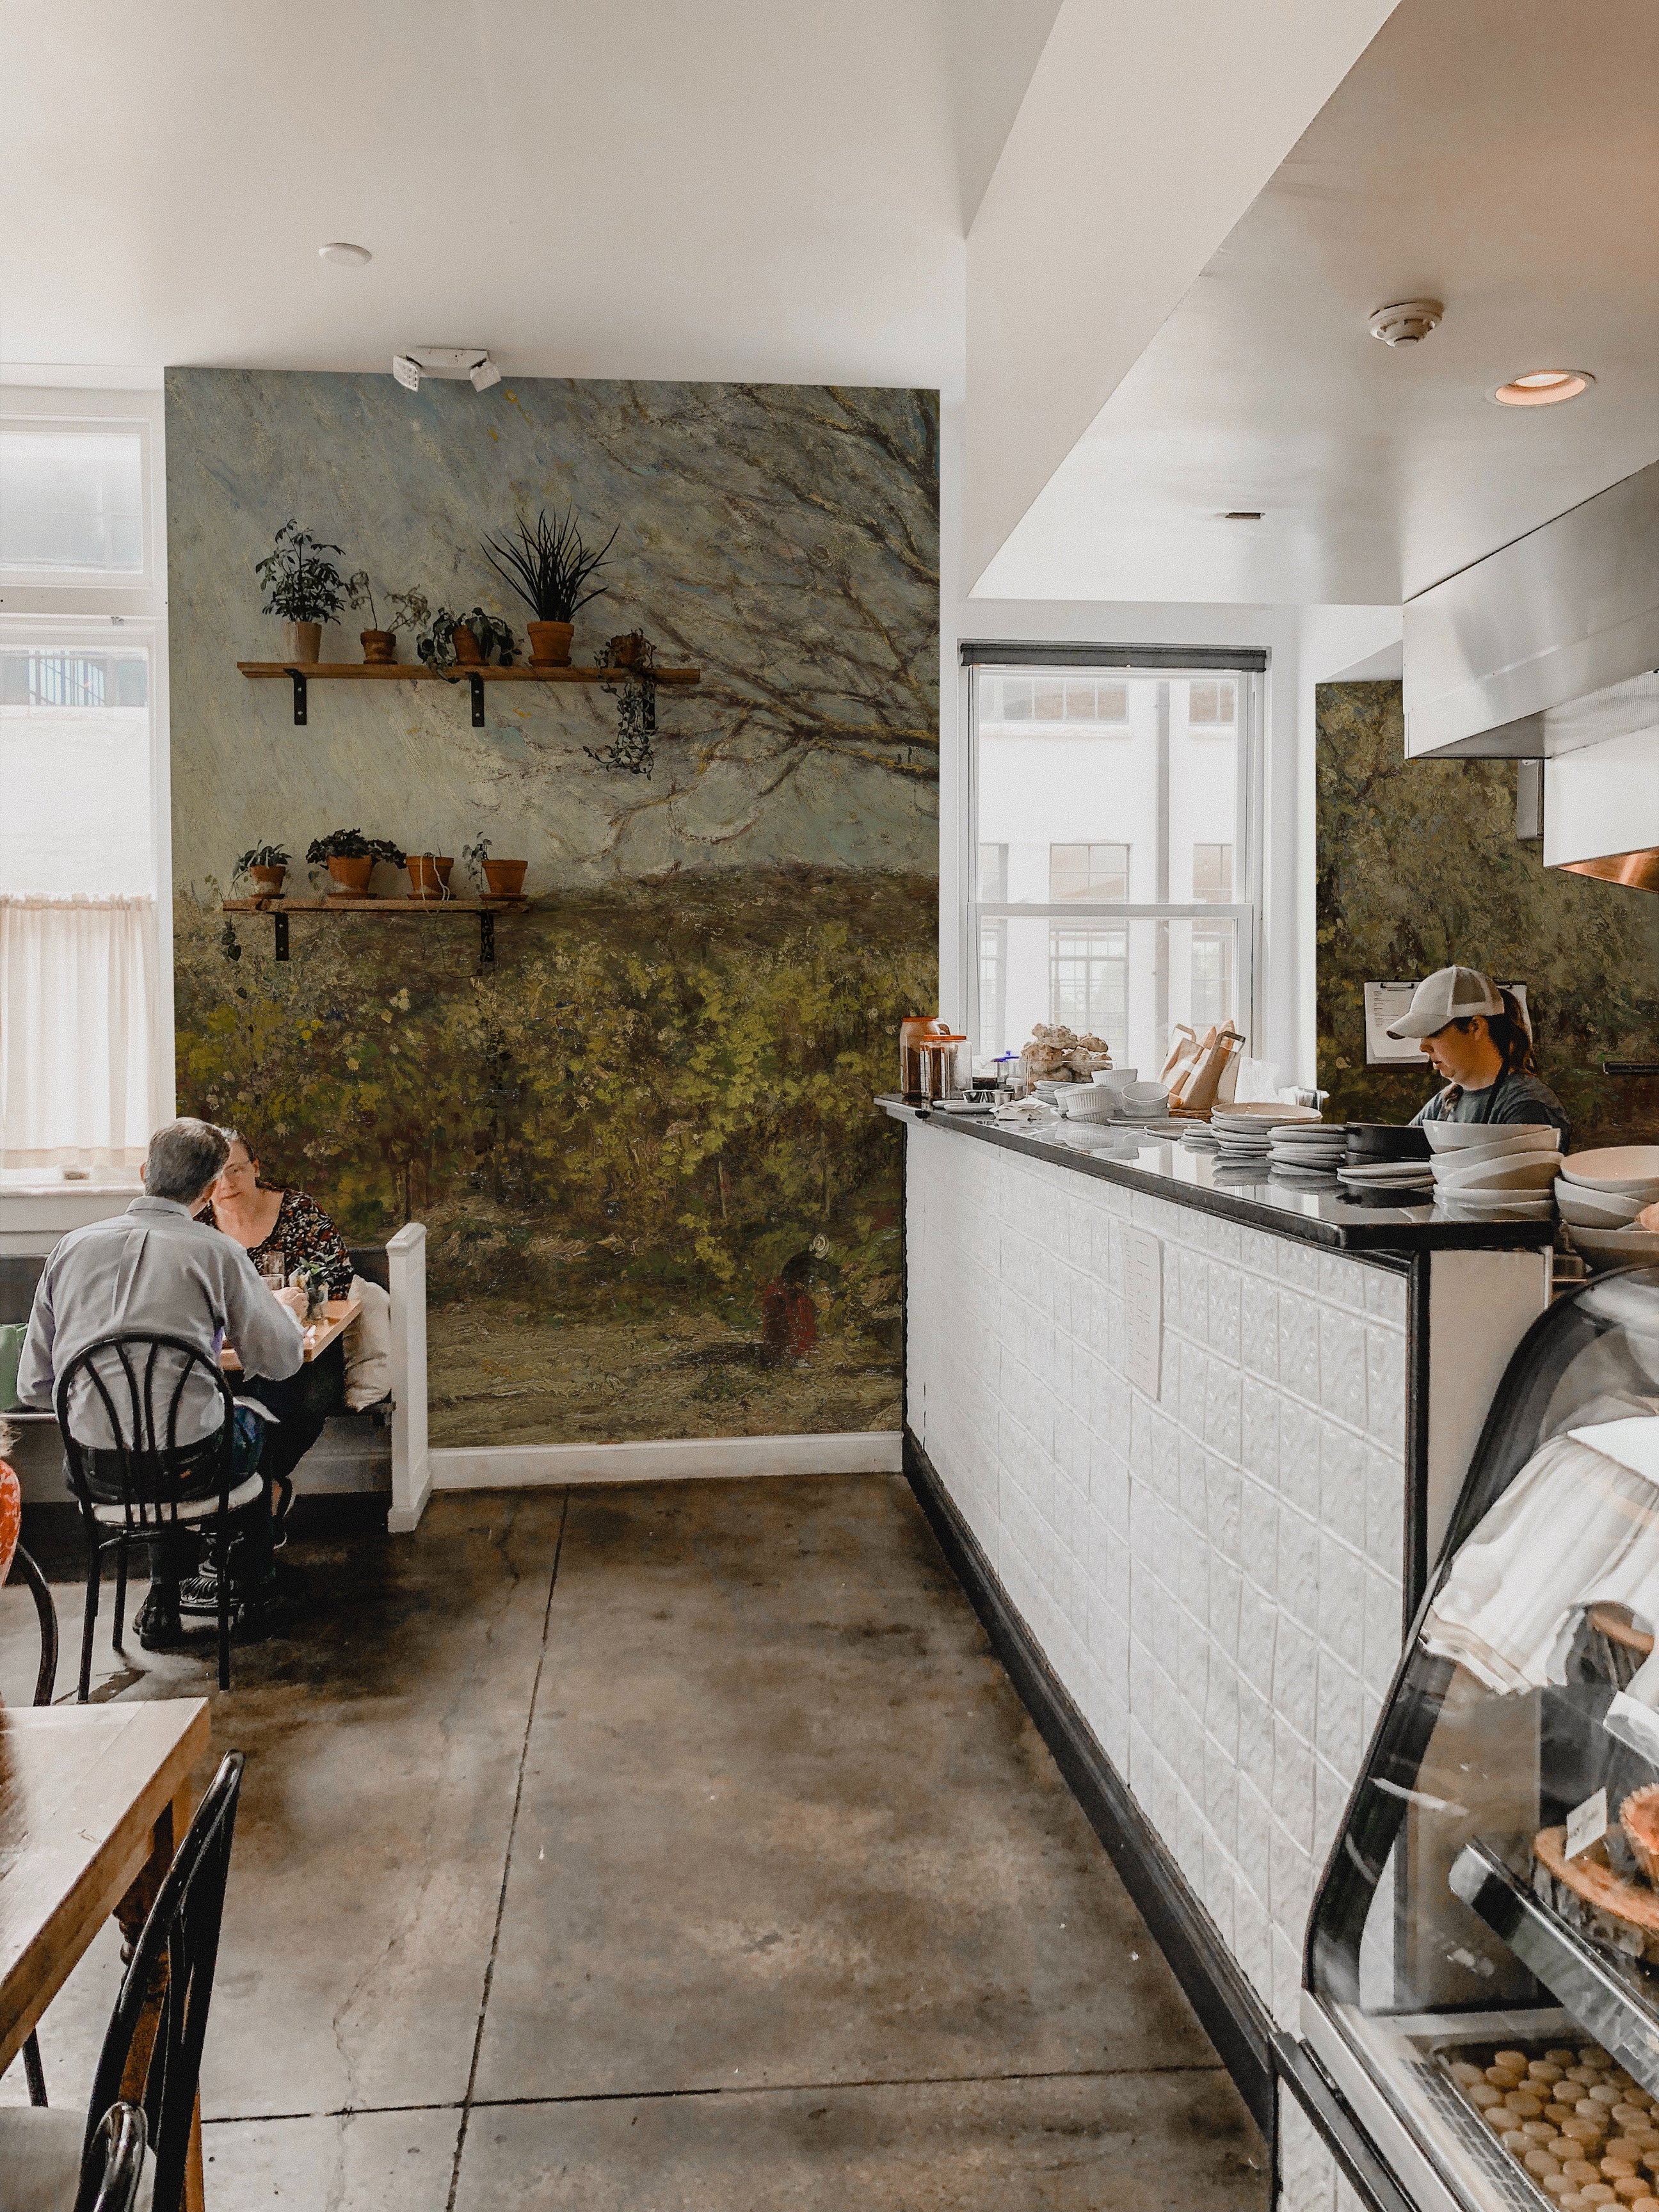 Vintage-style cafe interior with a rustic landscape wall mural. The scene on the wall creates a tranquil backdrop for the cafe setting, featuring wooden shelves with potted plants and simple seating arrangements